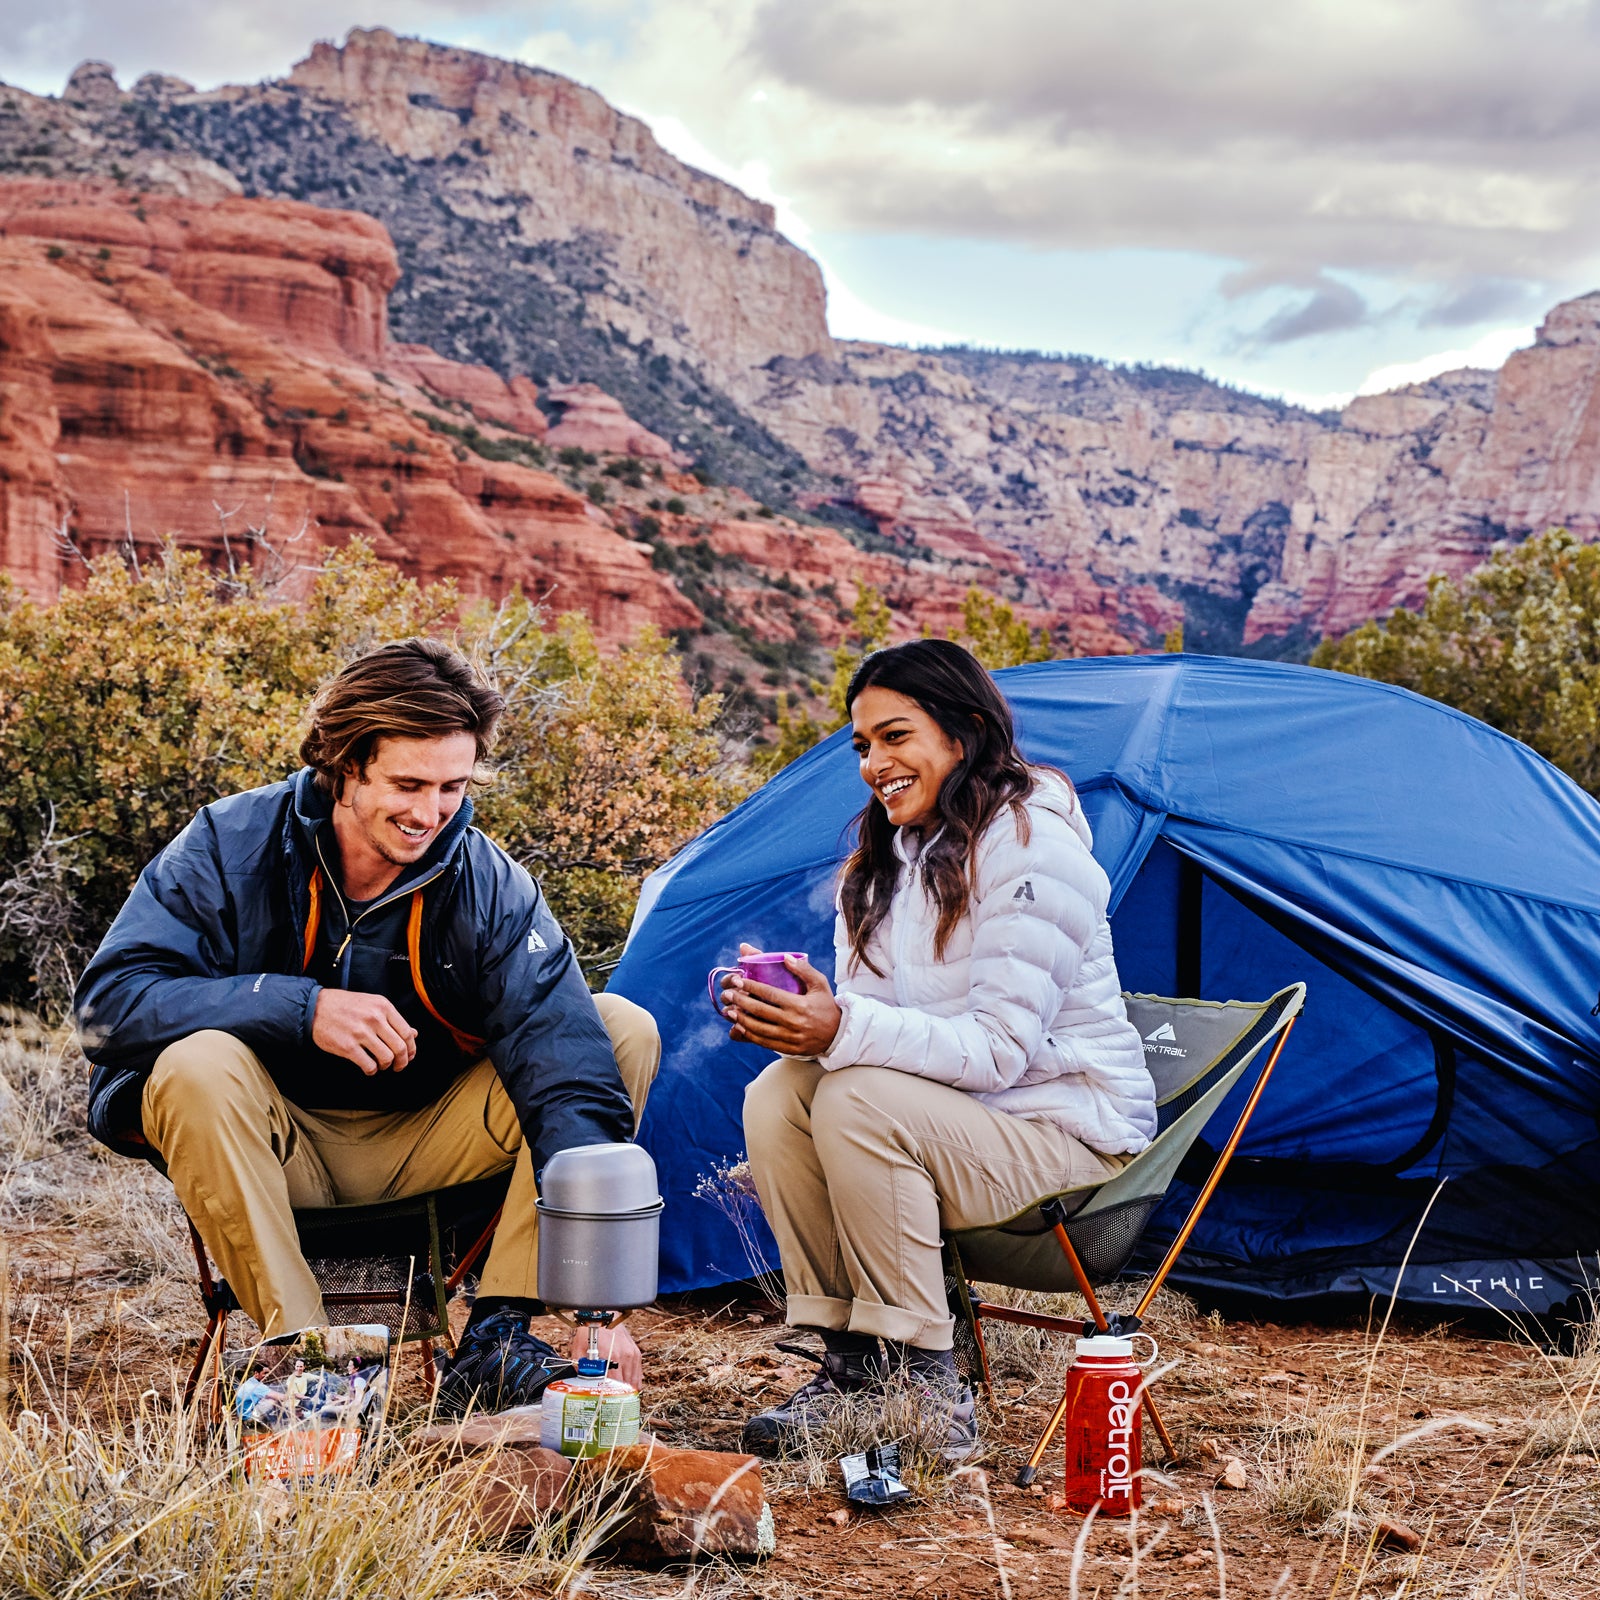 Walmart Just Launched a Line of Backpacking Gear